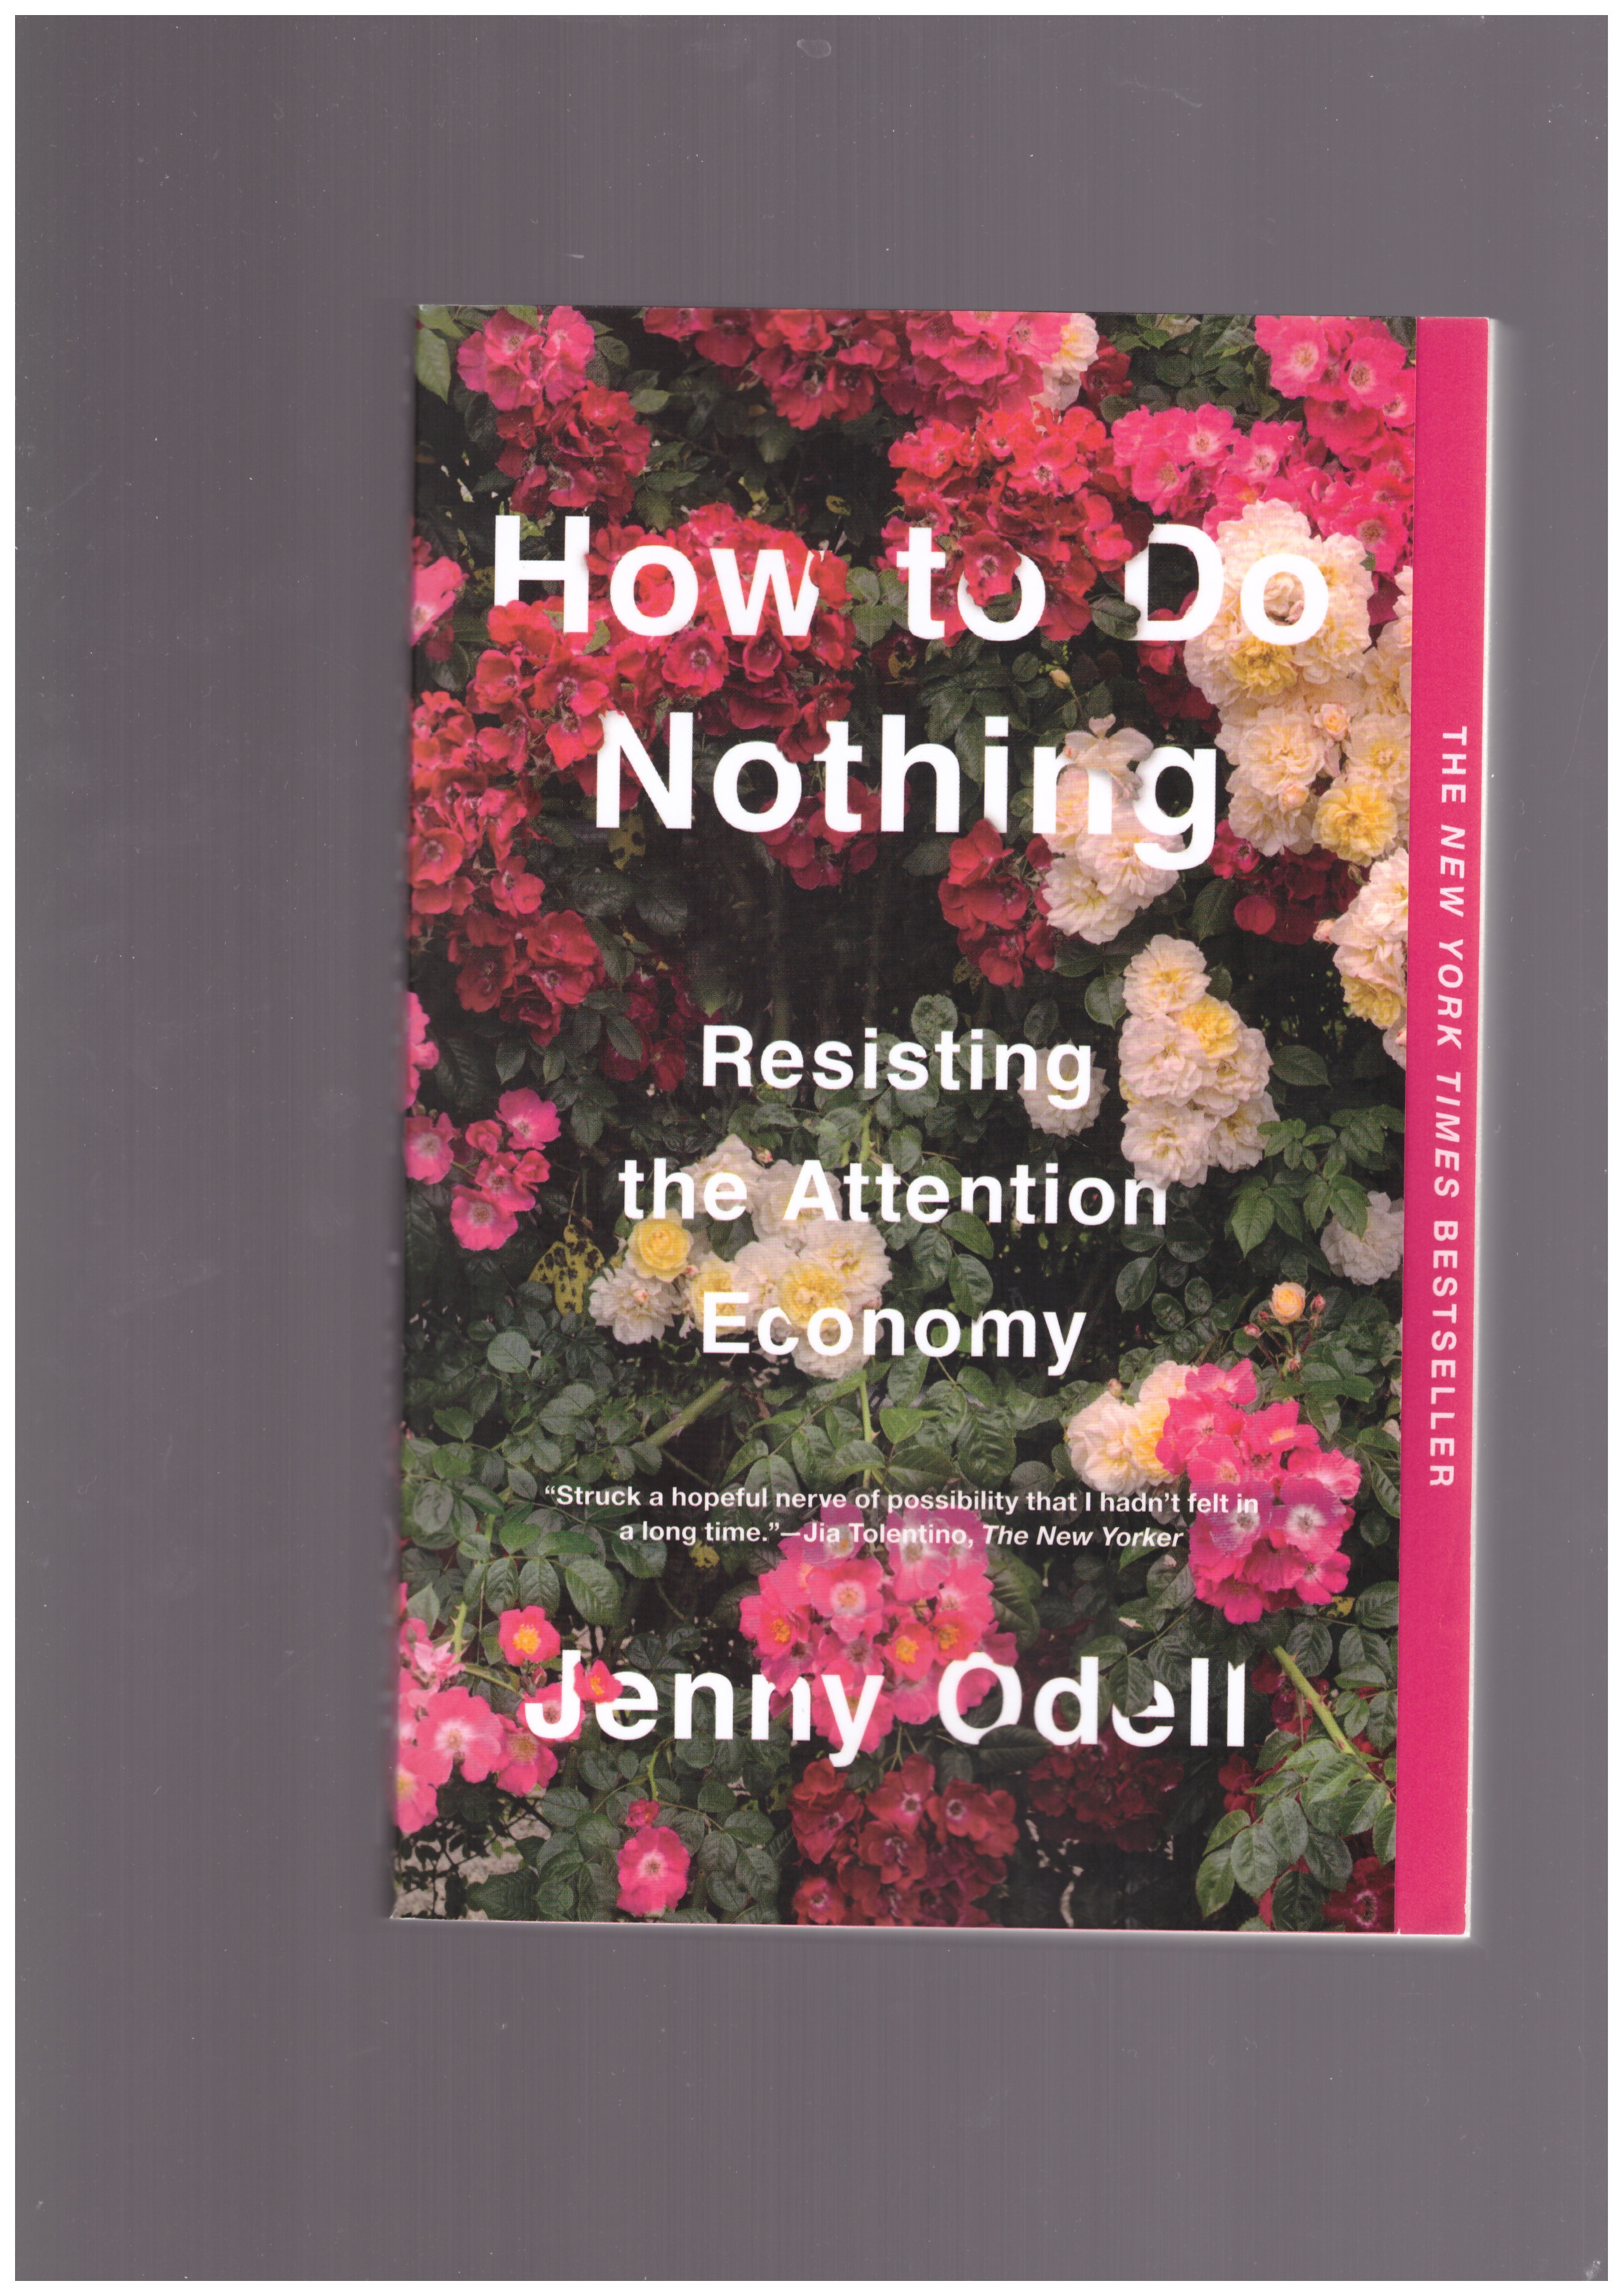 ODELL, Jenny - How to do nothing. Resisting the Attention Economy